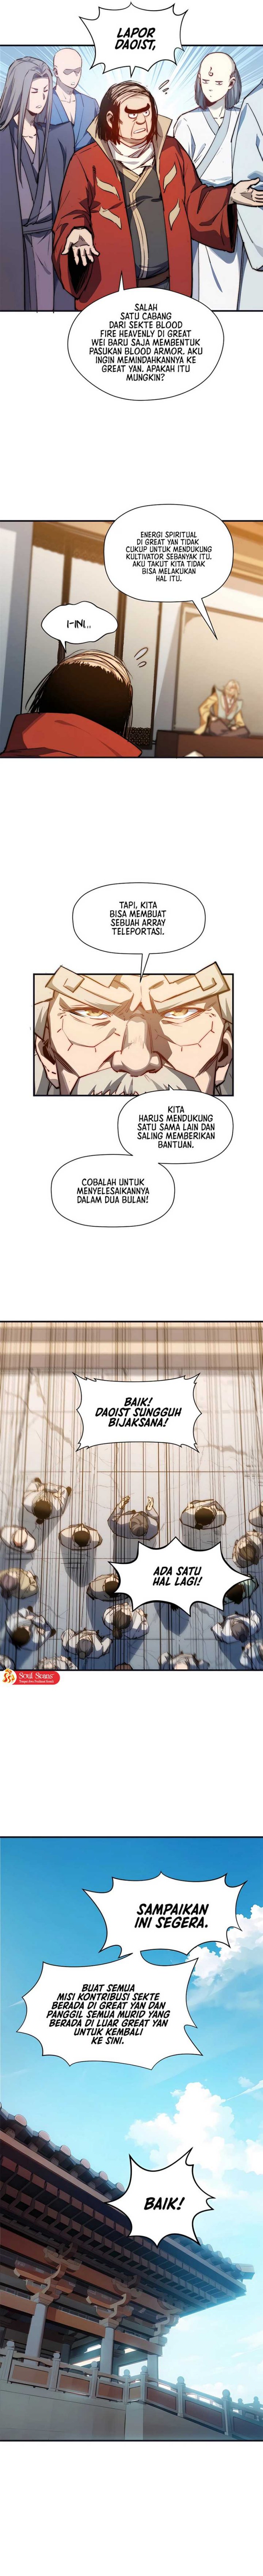 Dilarang COPAS - situs resmi www.mangacanblog.com - Komik top tier providence secretly cultivate for a thousand years 128 - chapter 128 129 Indonesia top tier providence secretly cultivate for a thousand years 128 - chapter 128 Terbaru 7|Baca Manga Komik Indonesia|Mangacan